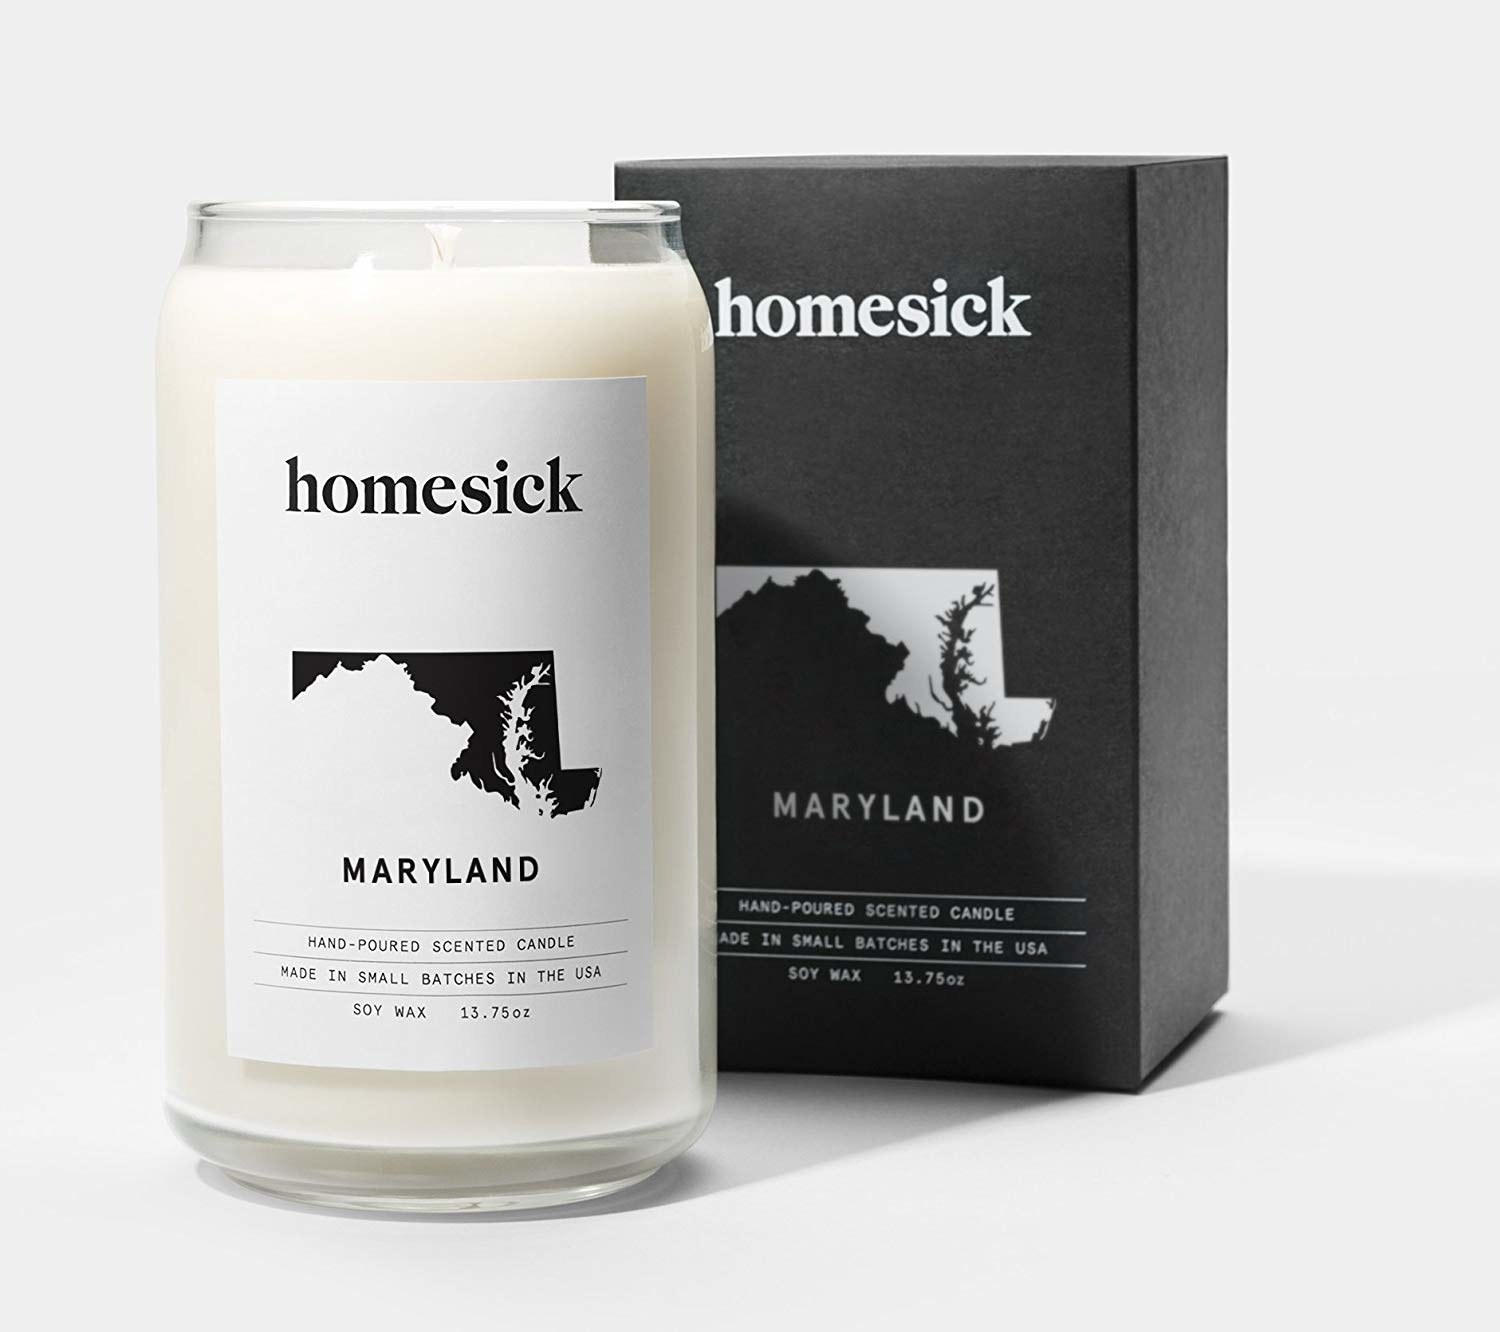 the Maryland candle